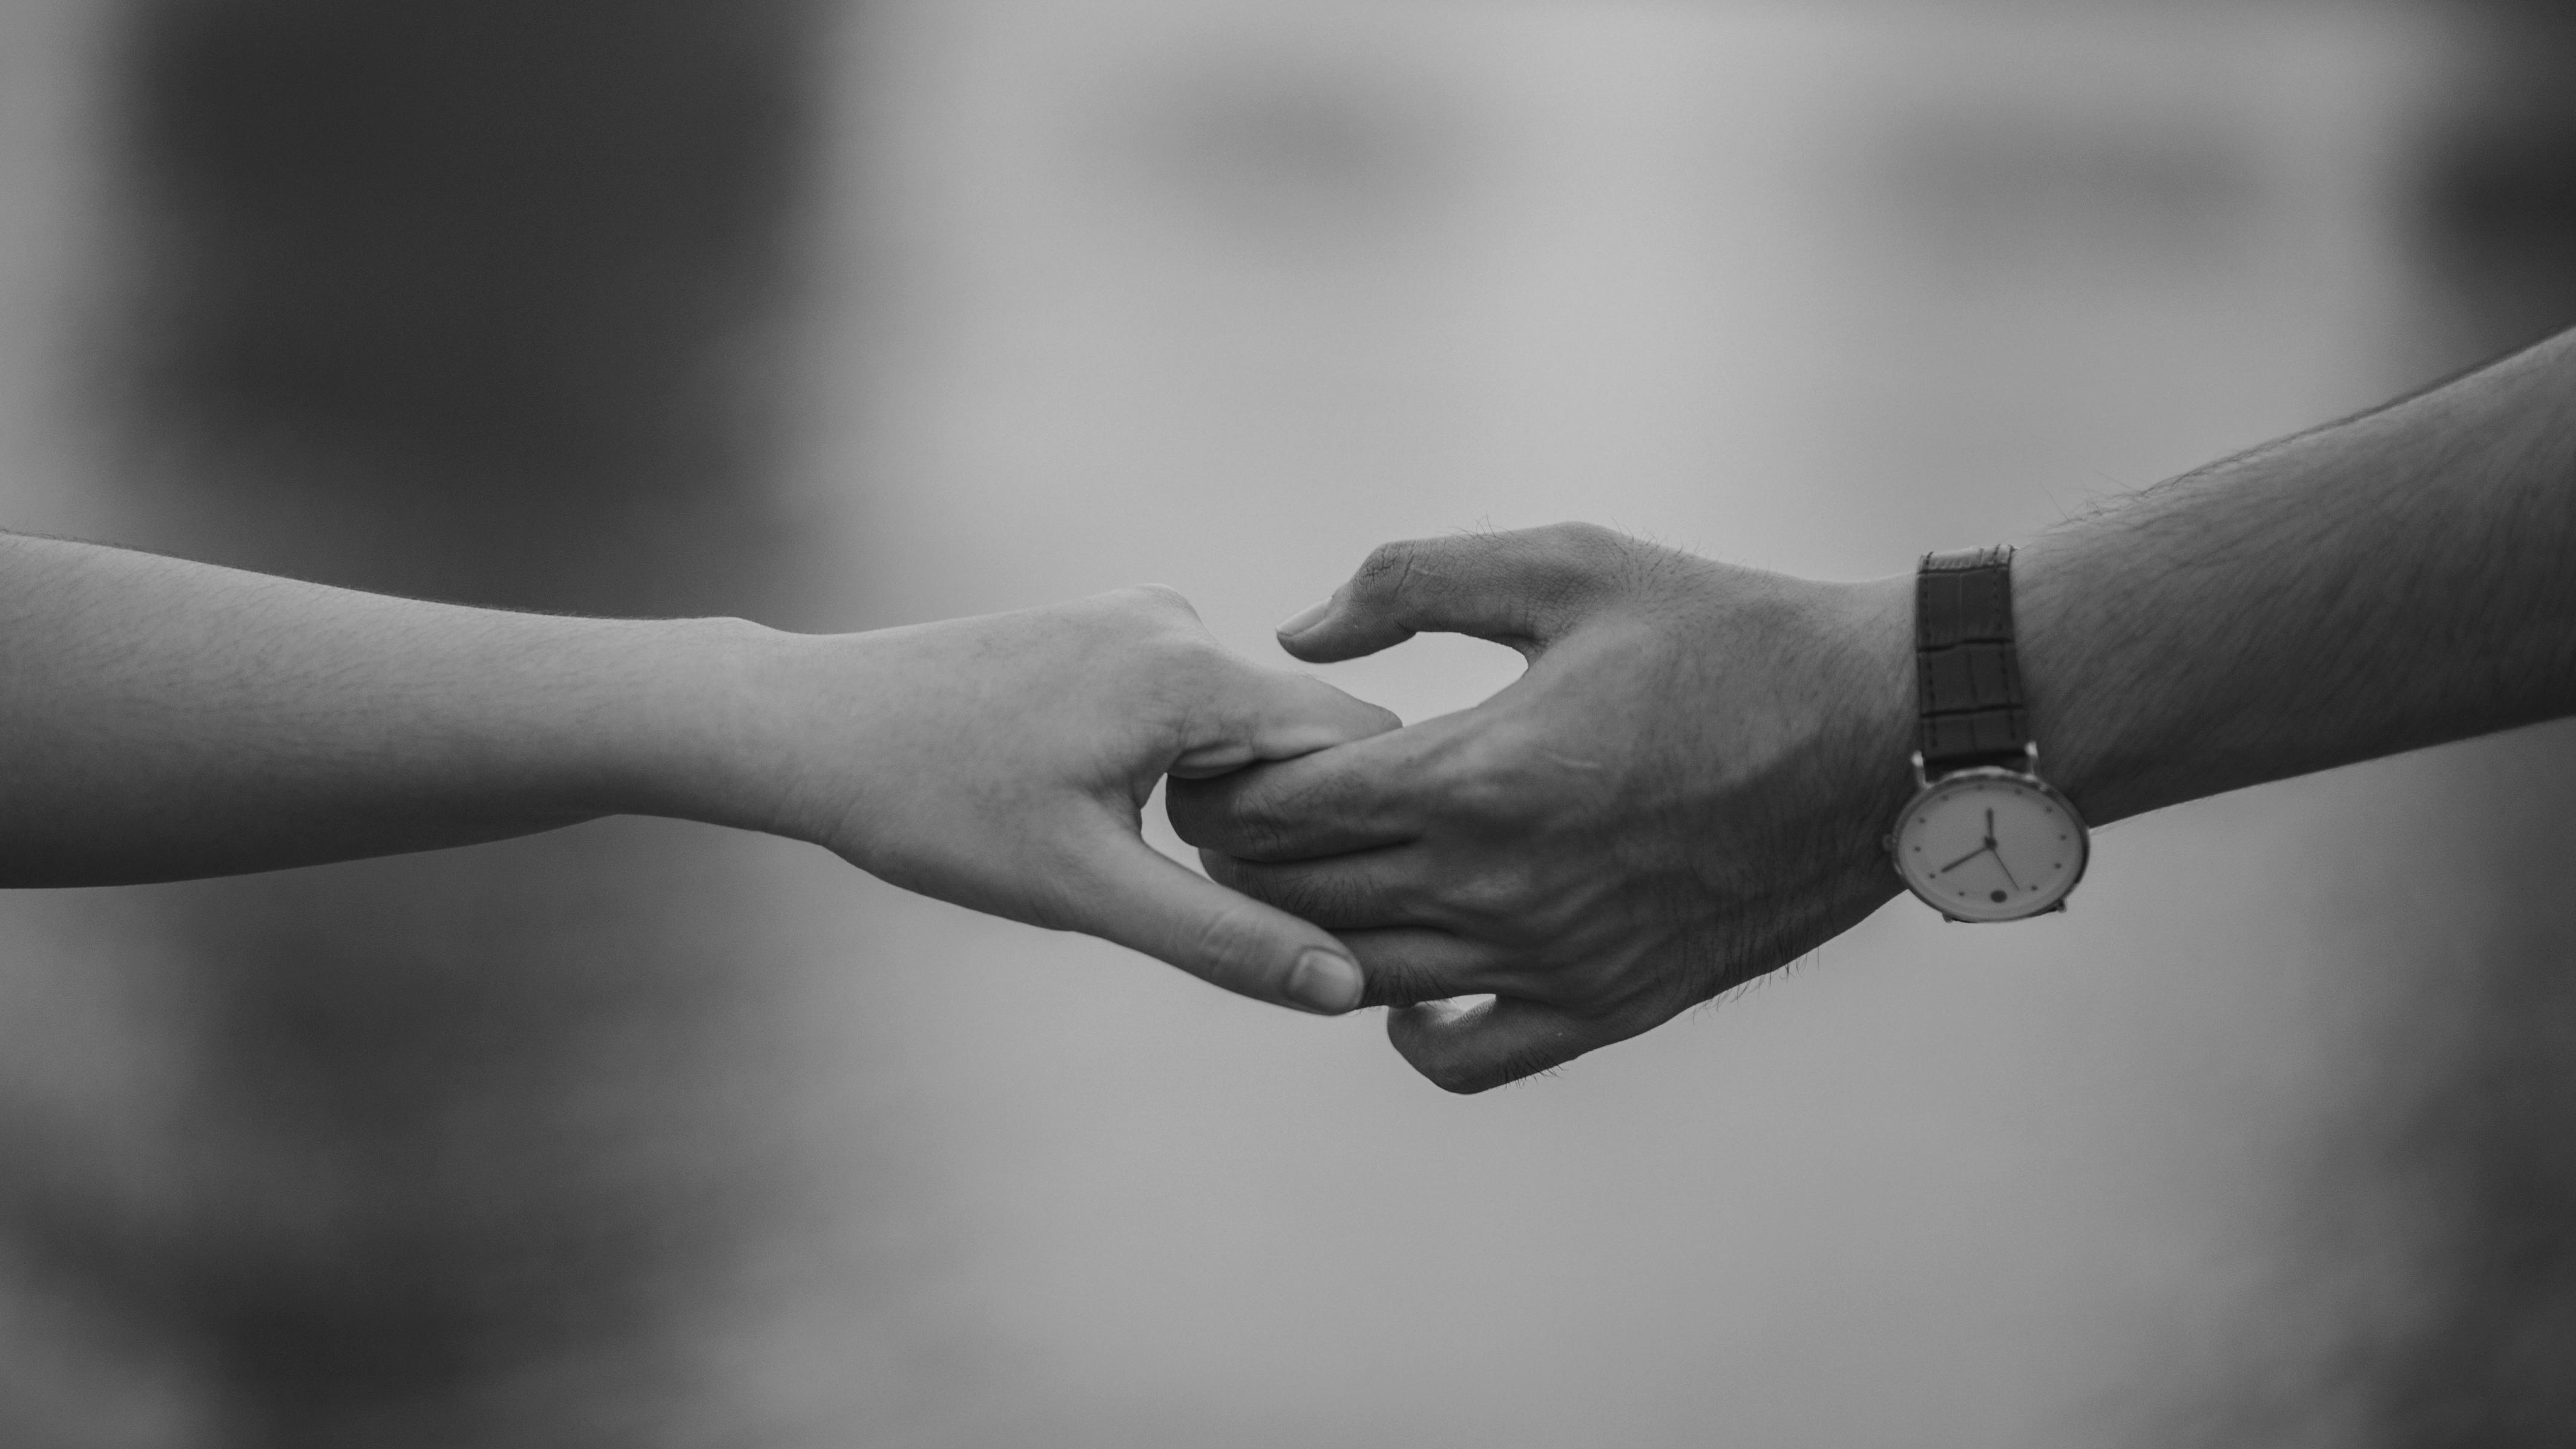 A man reaching for a woman's hand | Source: Pexels